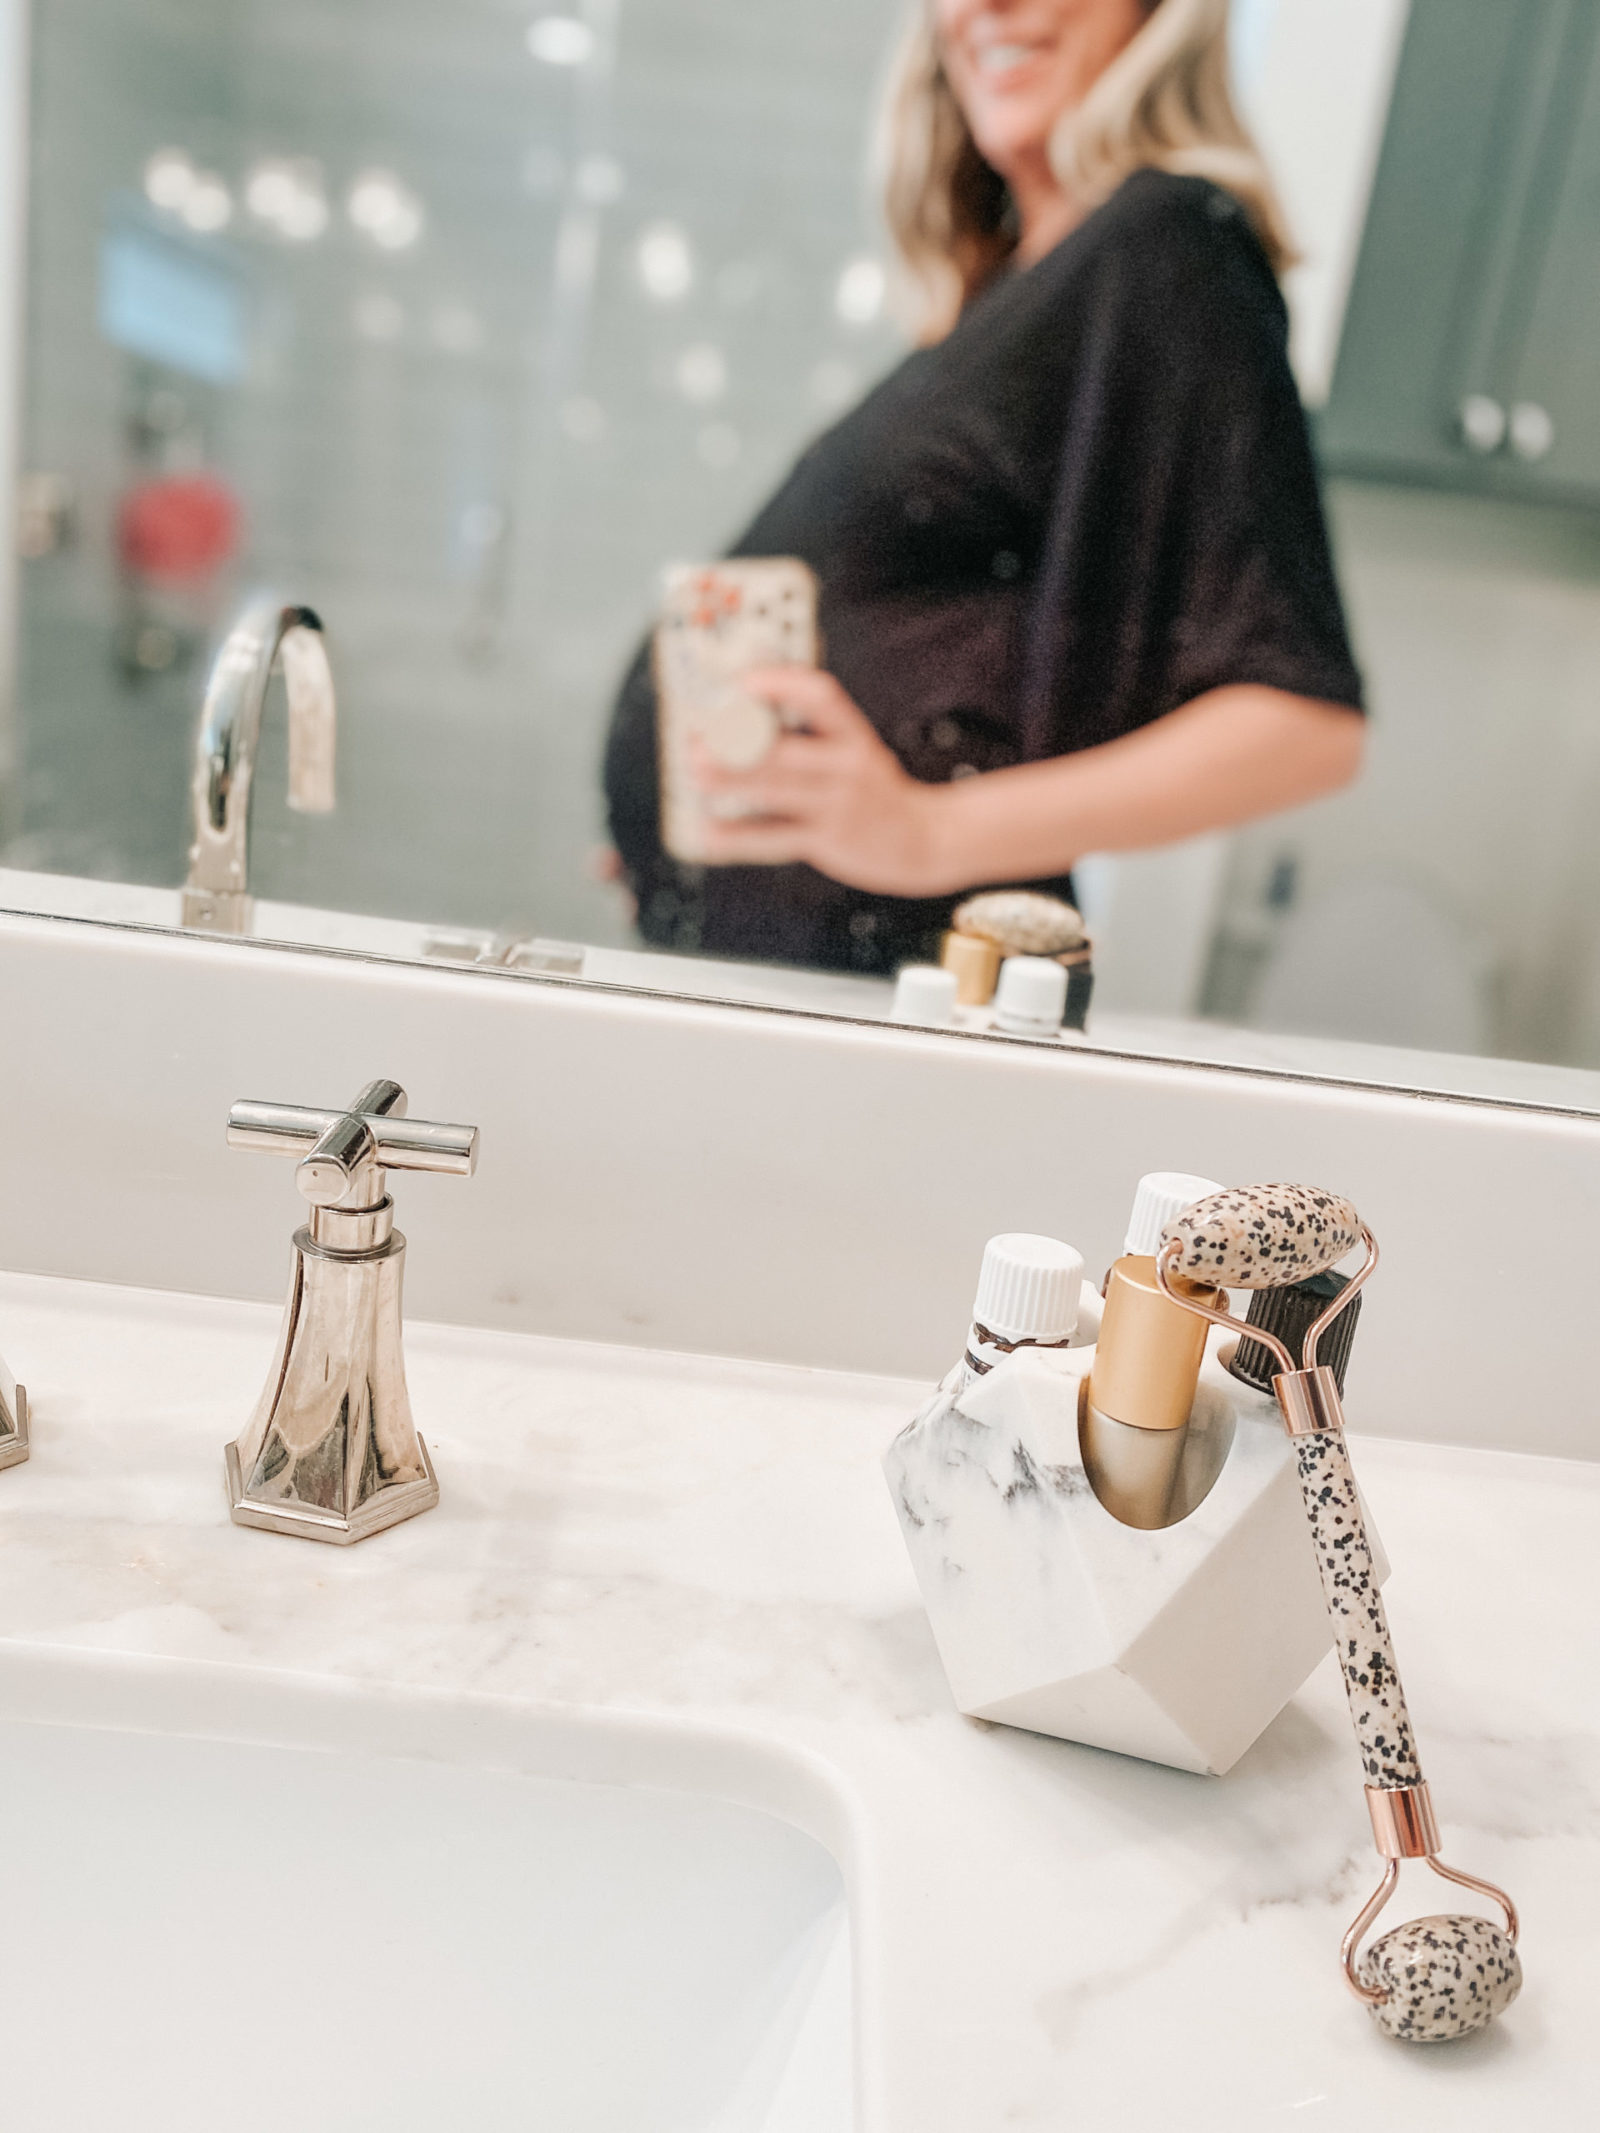 Wynne Elder uses a Whimsy + Wellness gemstone facial roller with Young Living Essential oils for skin support during pregnancy.